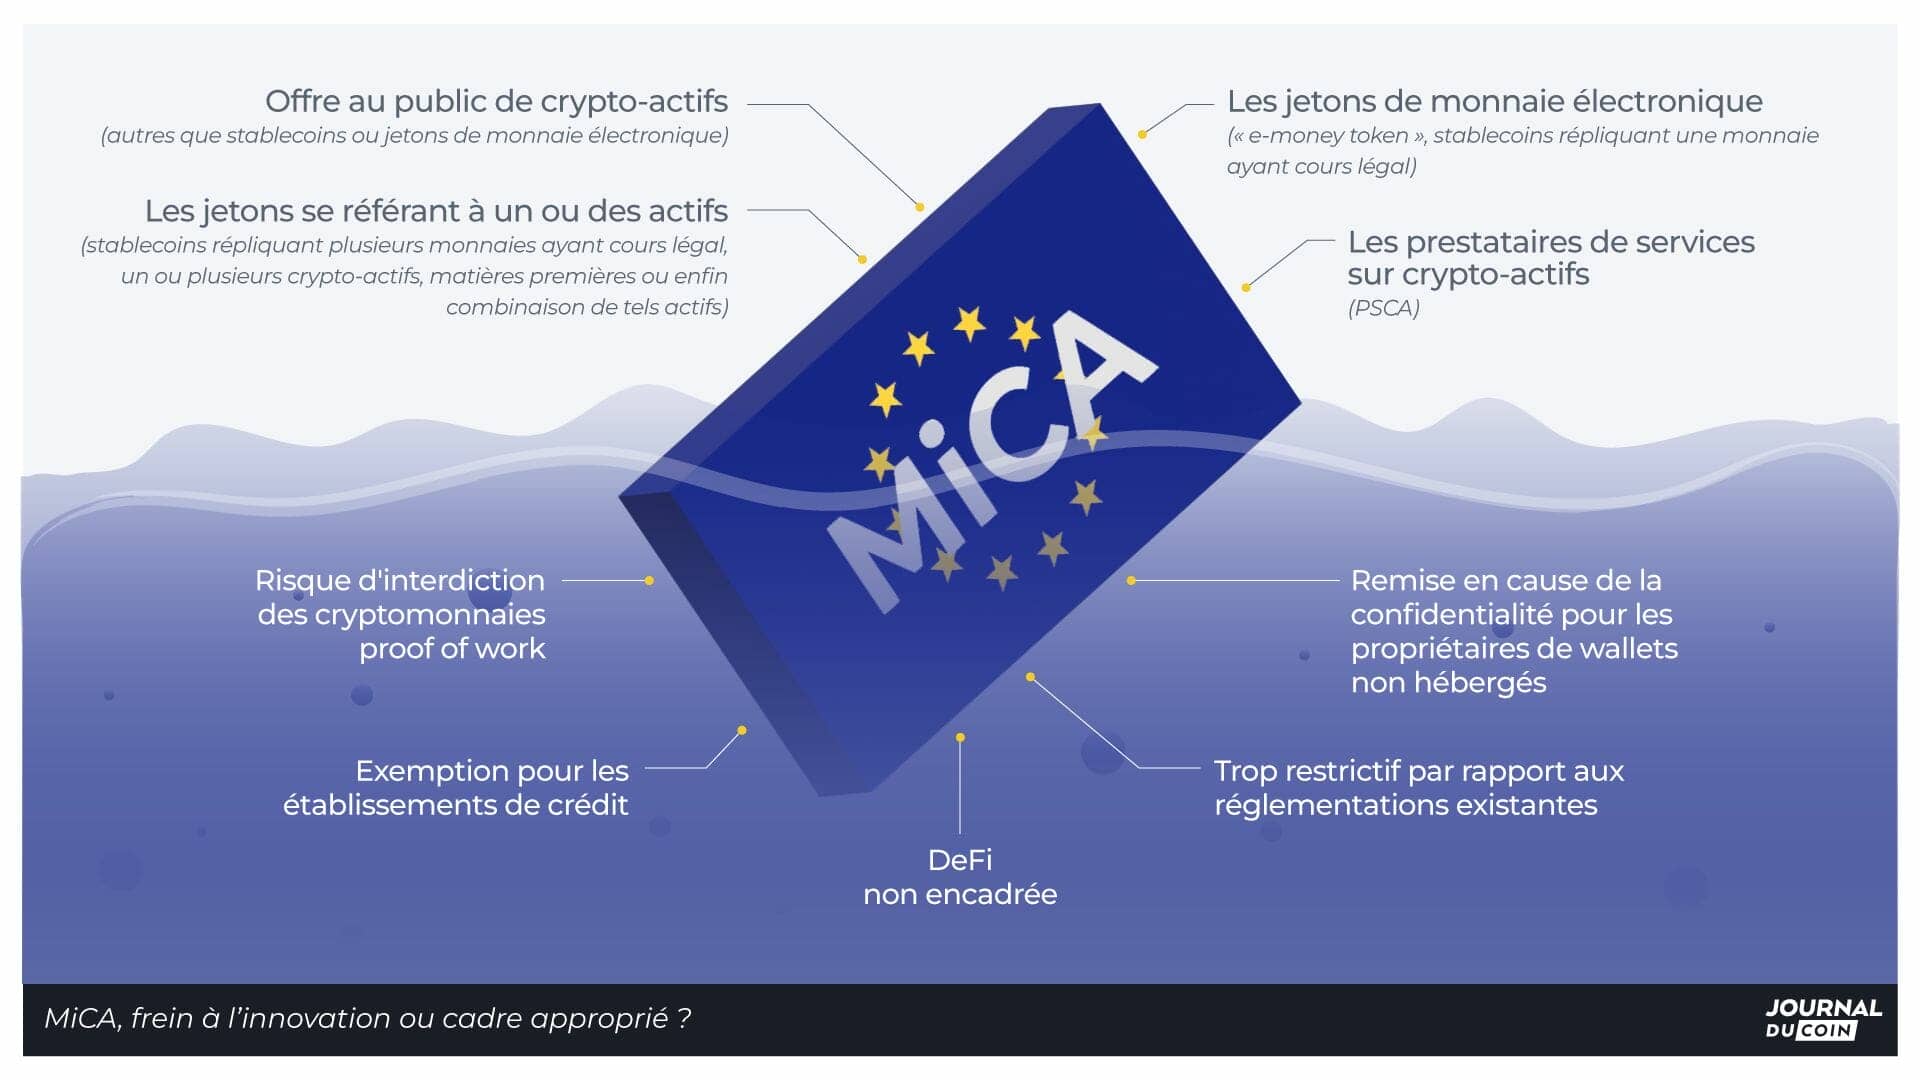 With MiCA - Markets in Crypto-Assets - European regulators want to set a framework for the crypto ecosystem